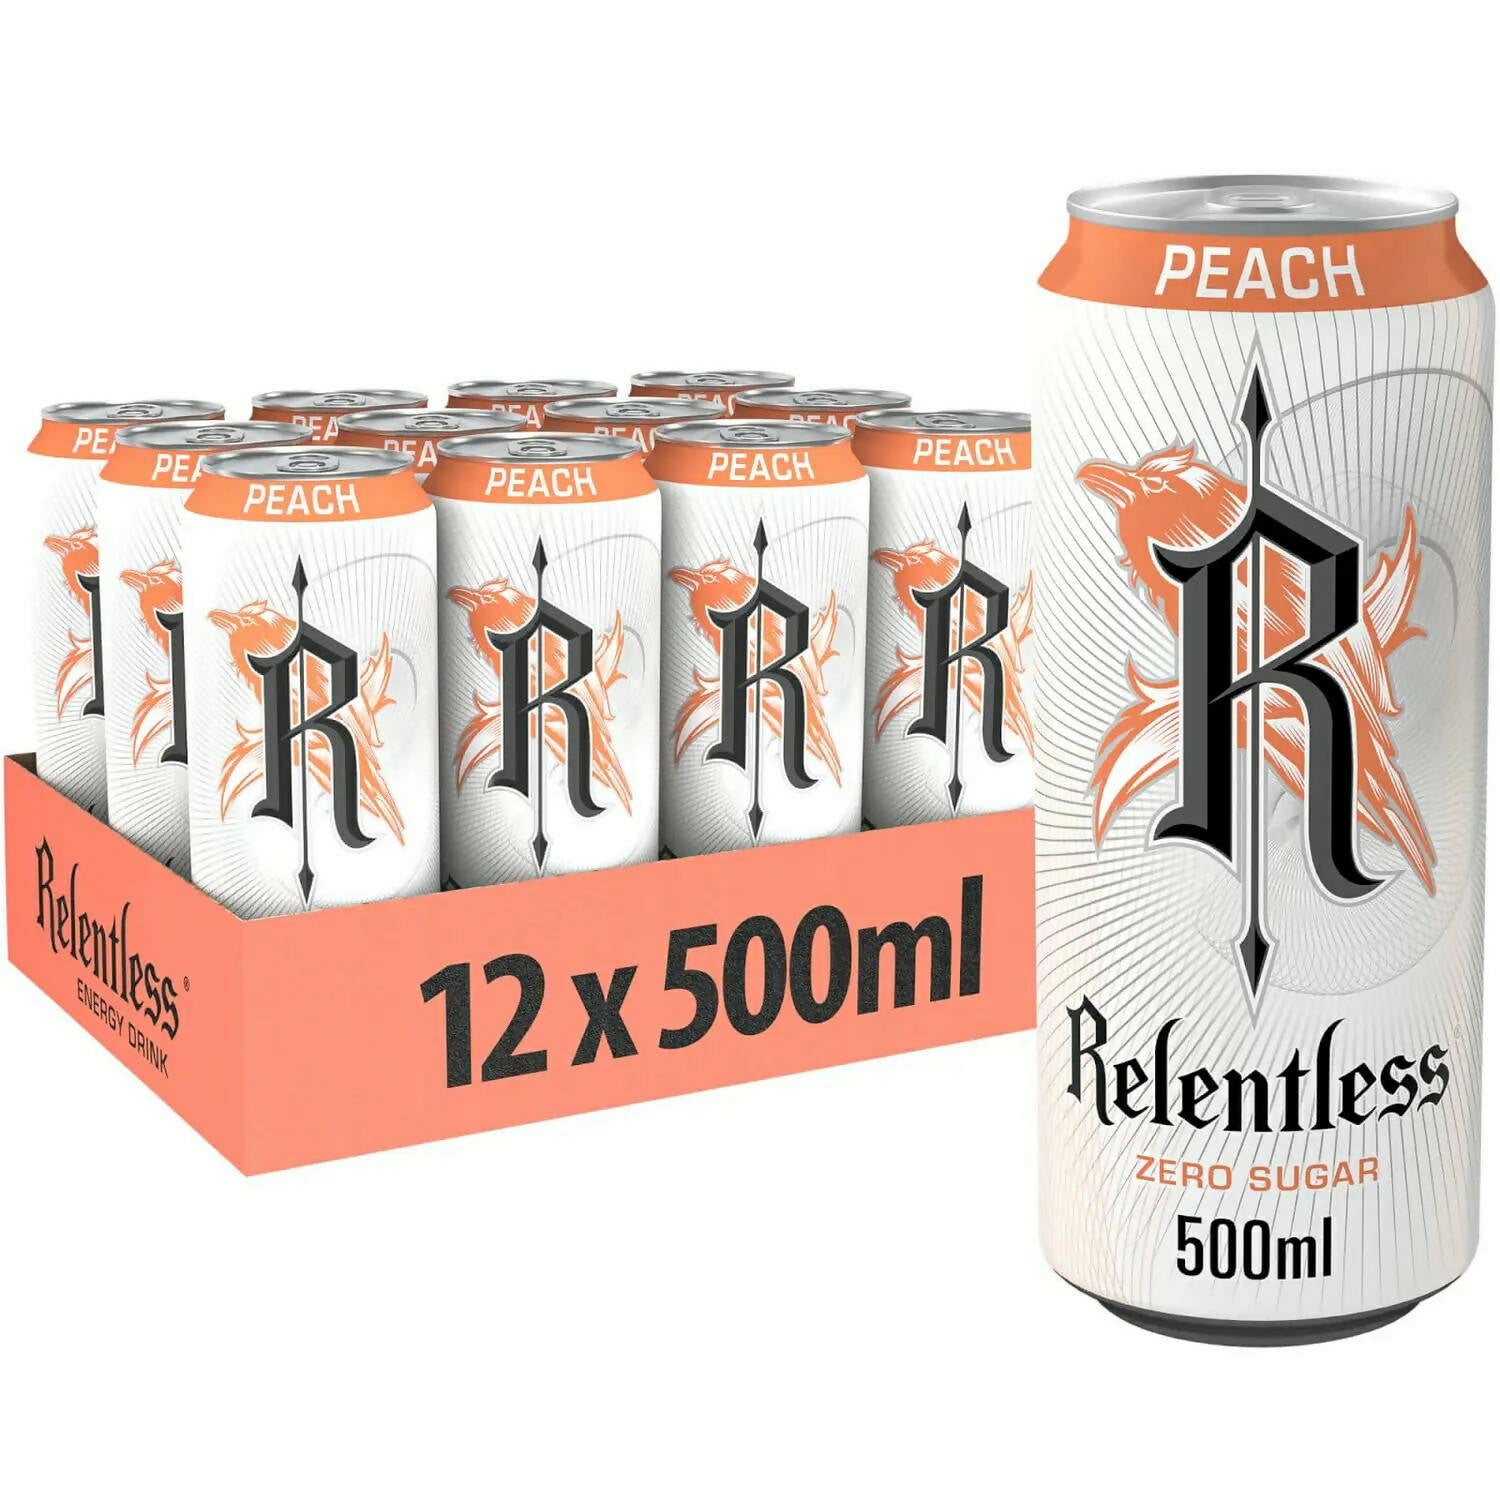 Relentless Peach Zero Sugar Energy Drink 12 x 500ml Energy and Sports Drink McGrocer Direct   